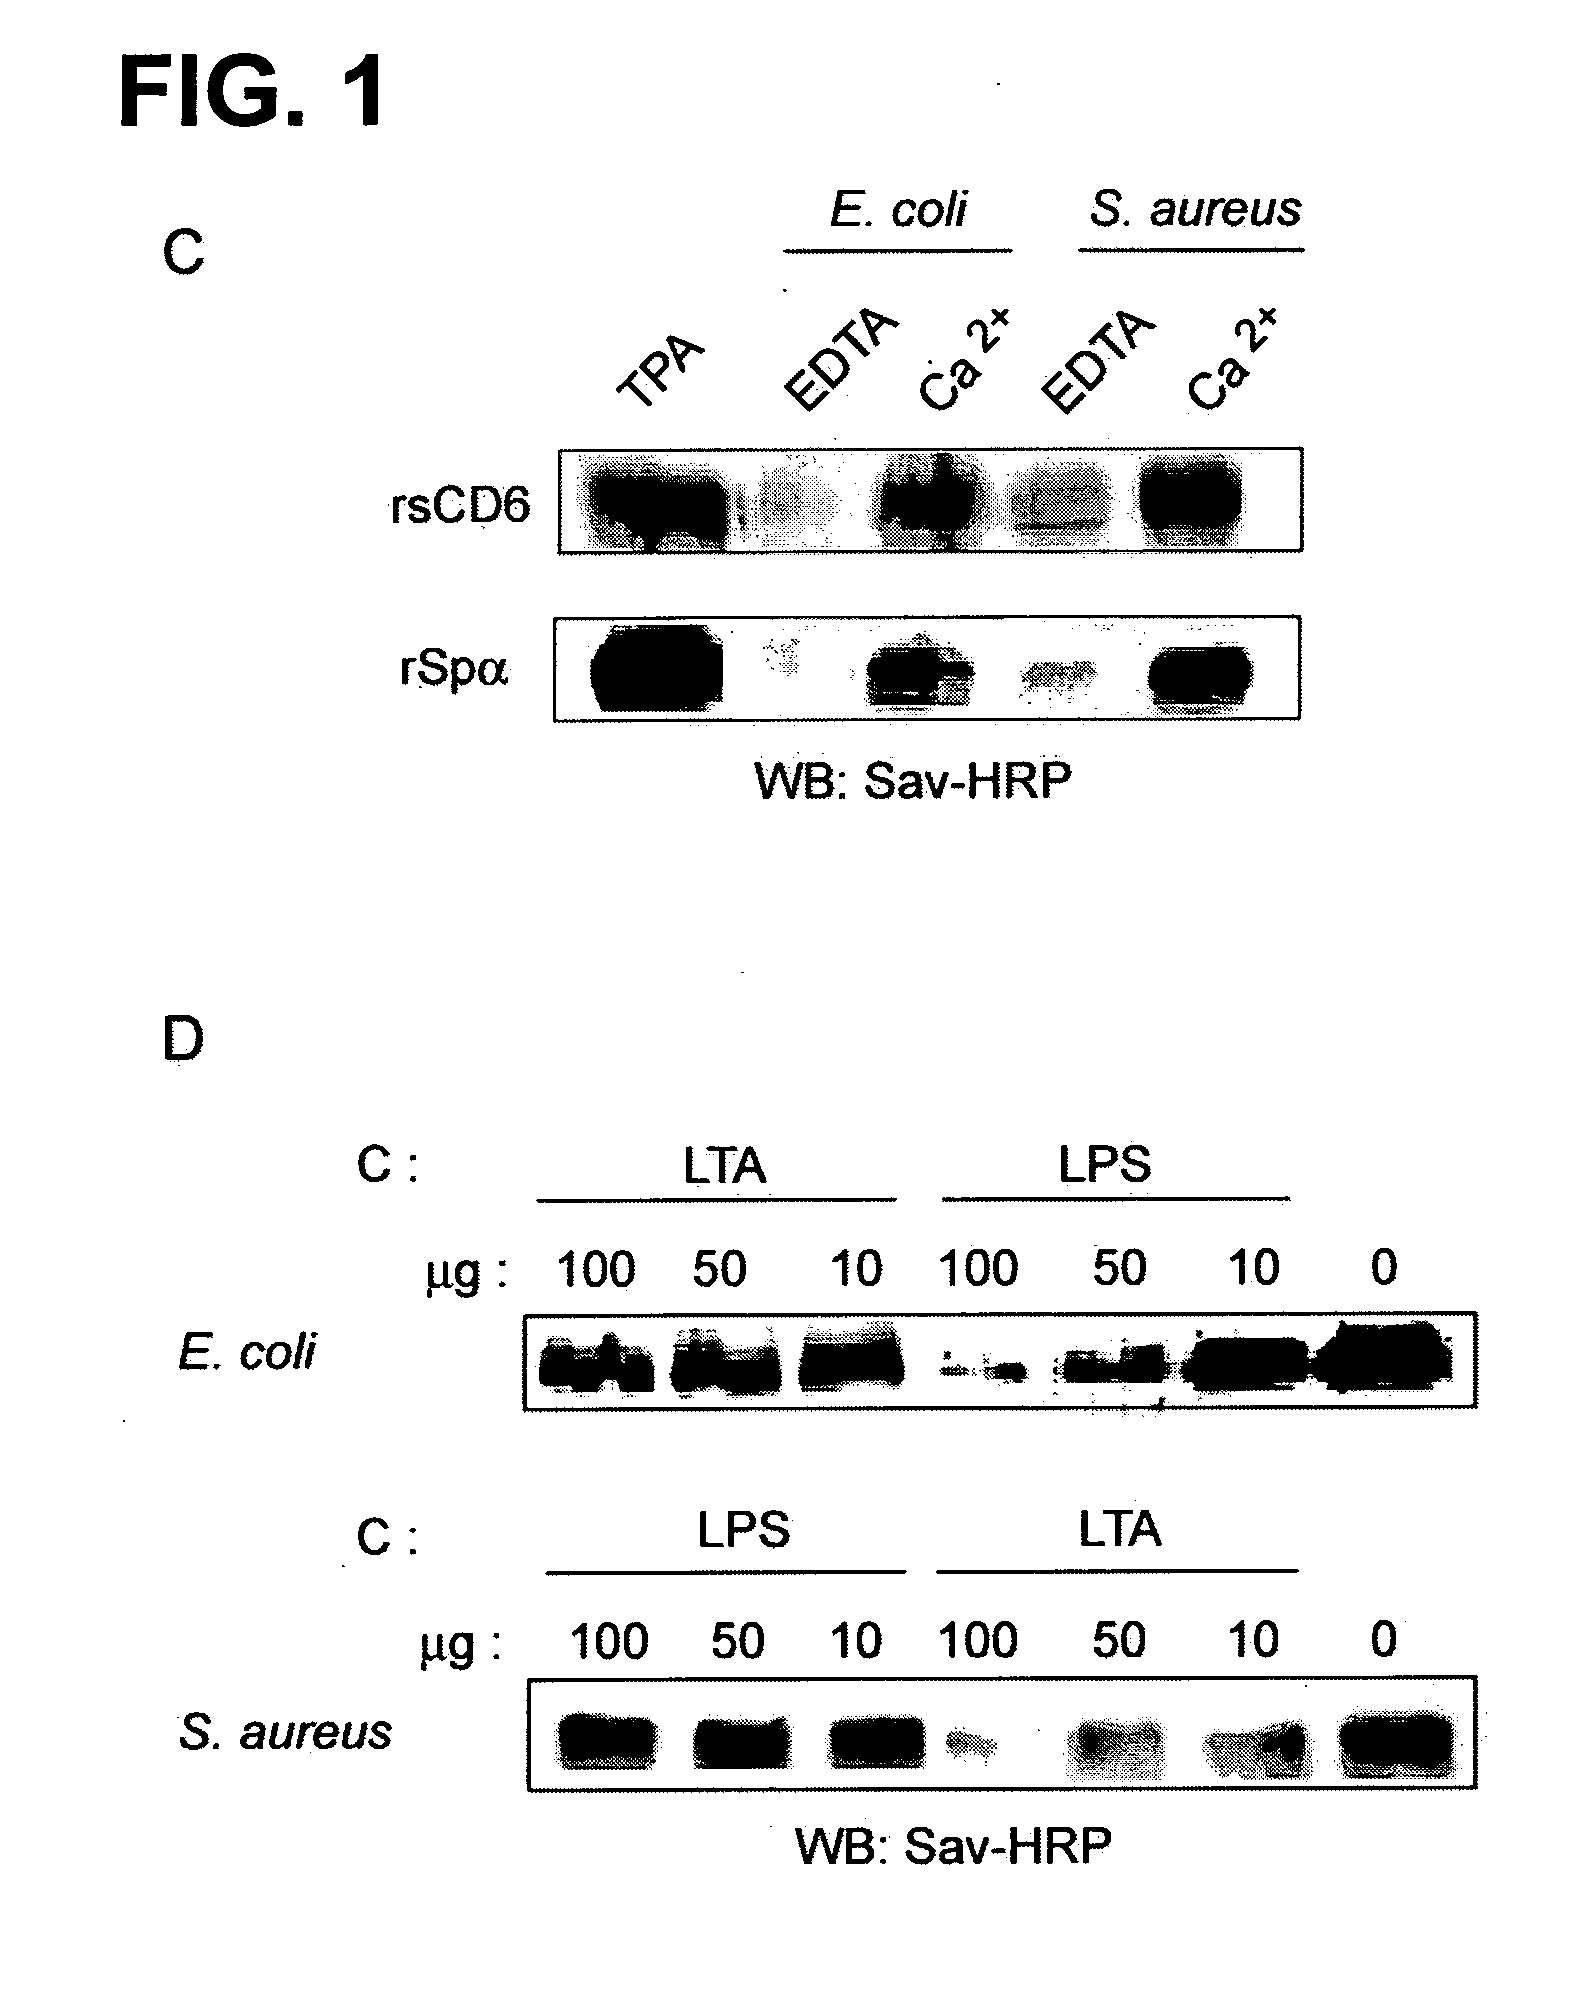 Protein Product for Treatment of Infectious Diseases and Related Inflammatory Processes